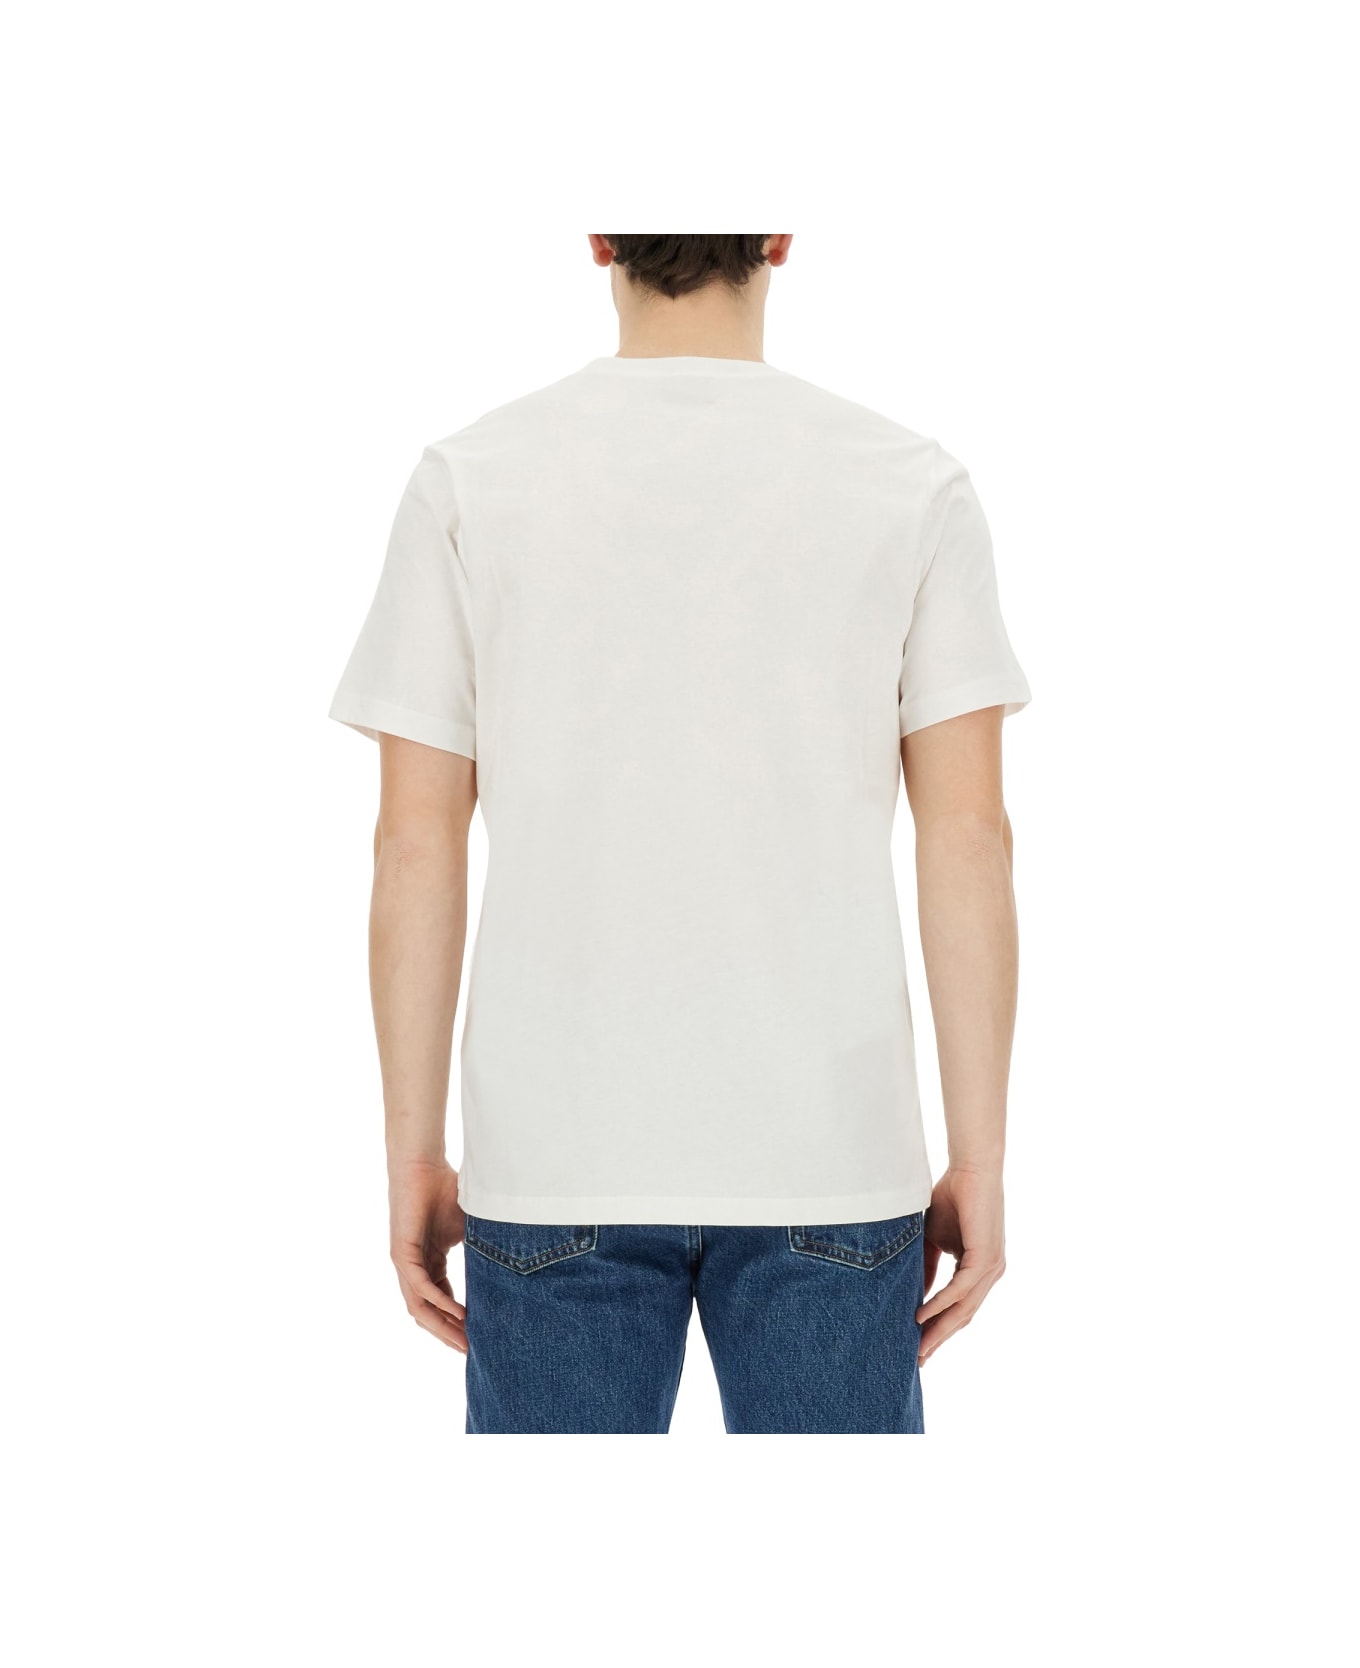 PS by Paul Smith "teddy" T-shirt - WHITE シャツ